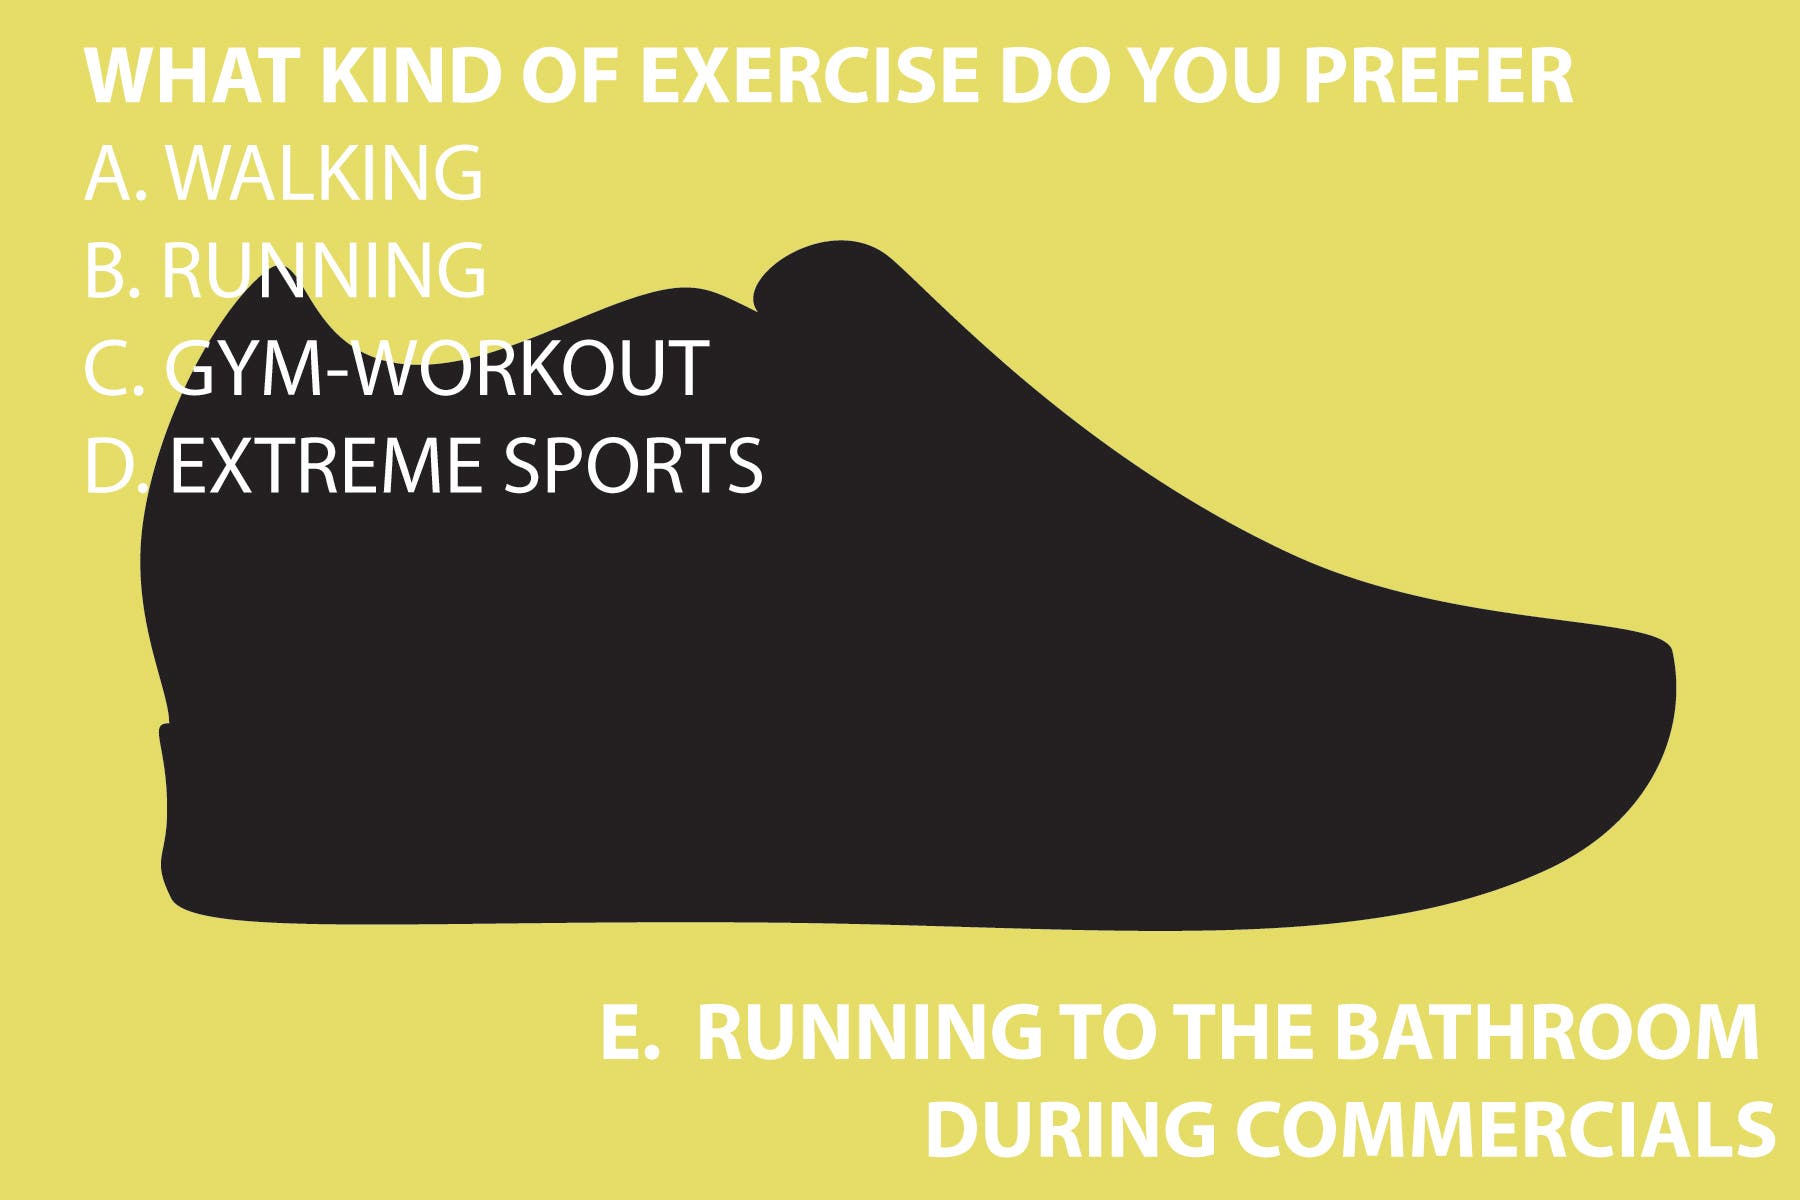  WHAT KIND OF WORKOUTS DO YOU PREFER?